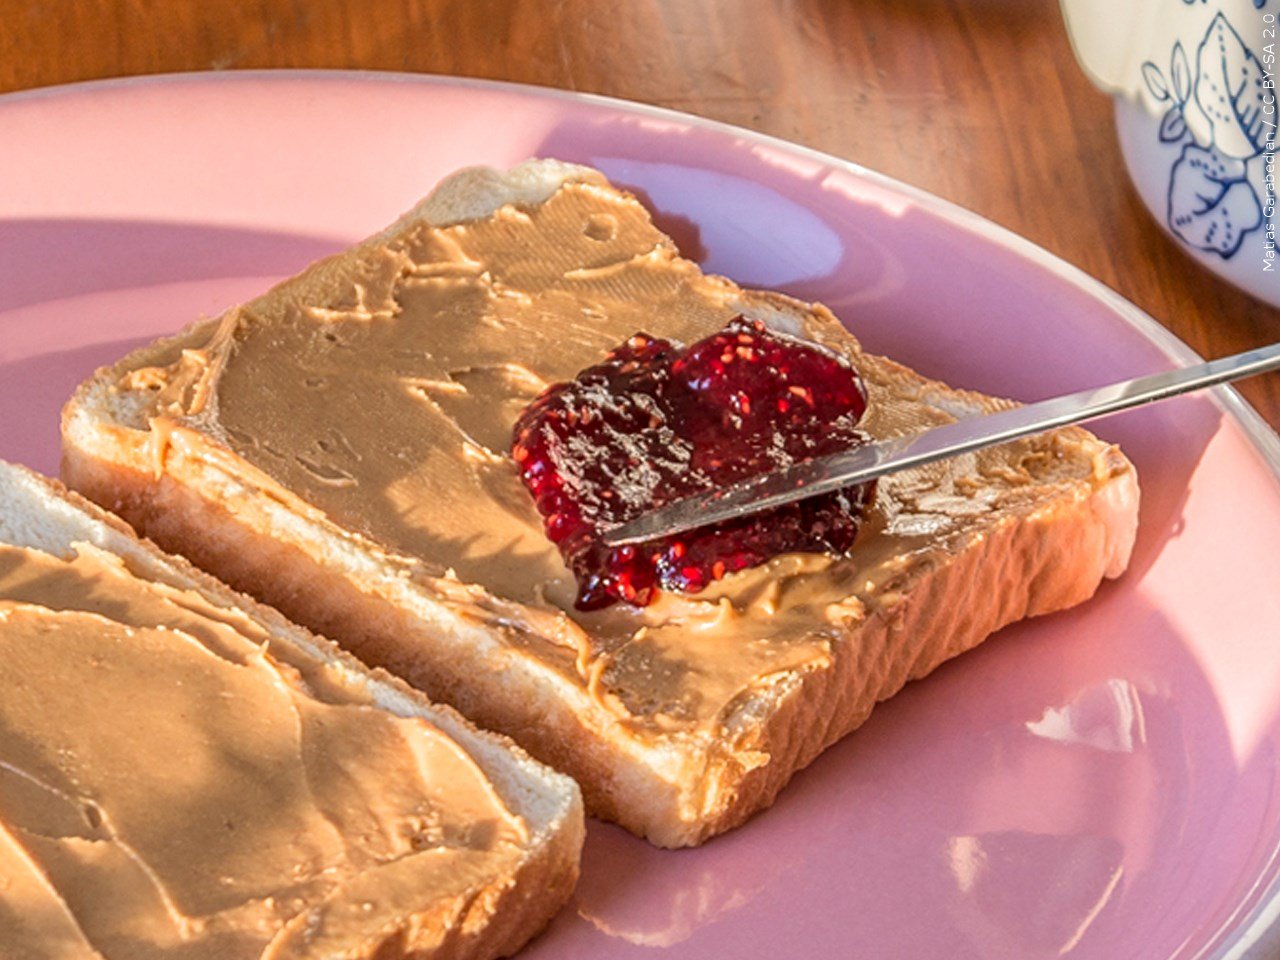 It's National Peanut Butter and Jelly Day! WBBJ TV